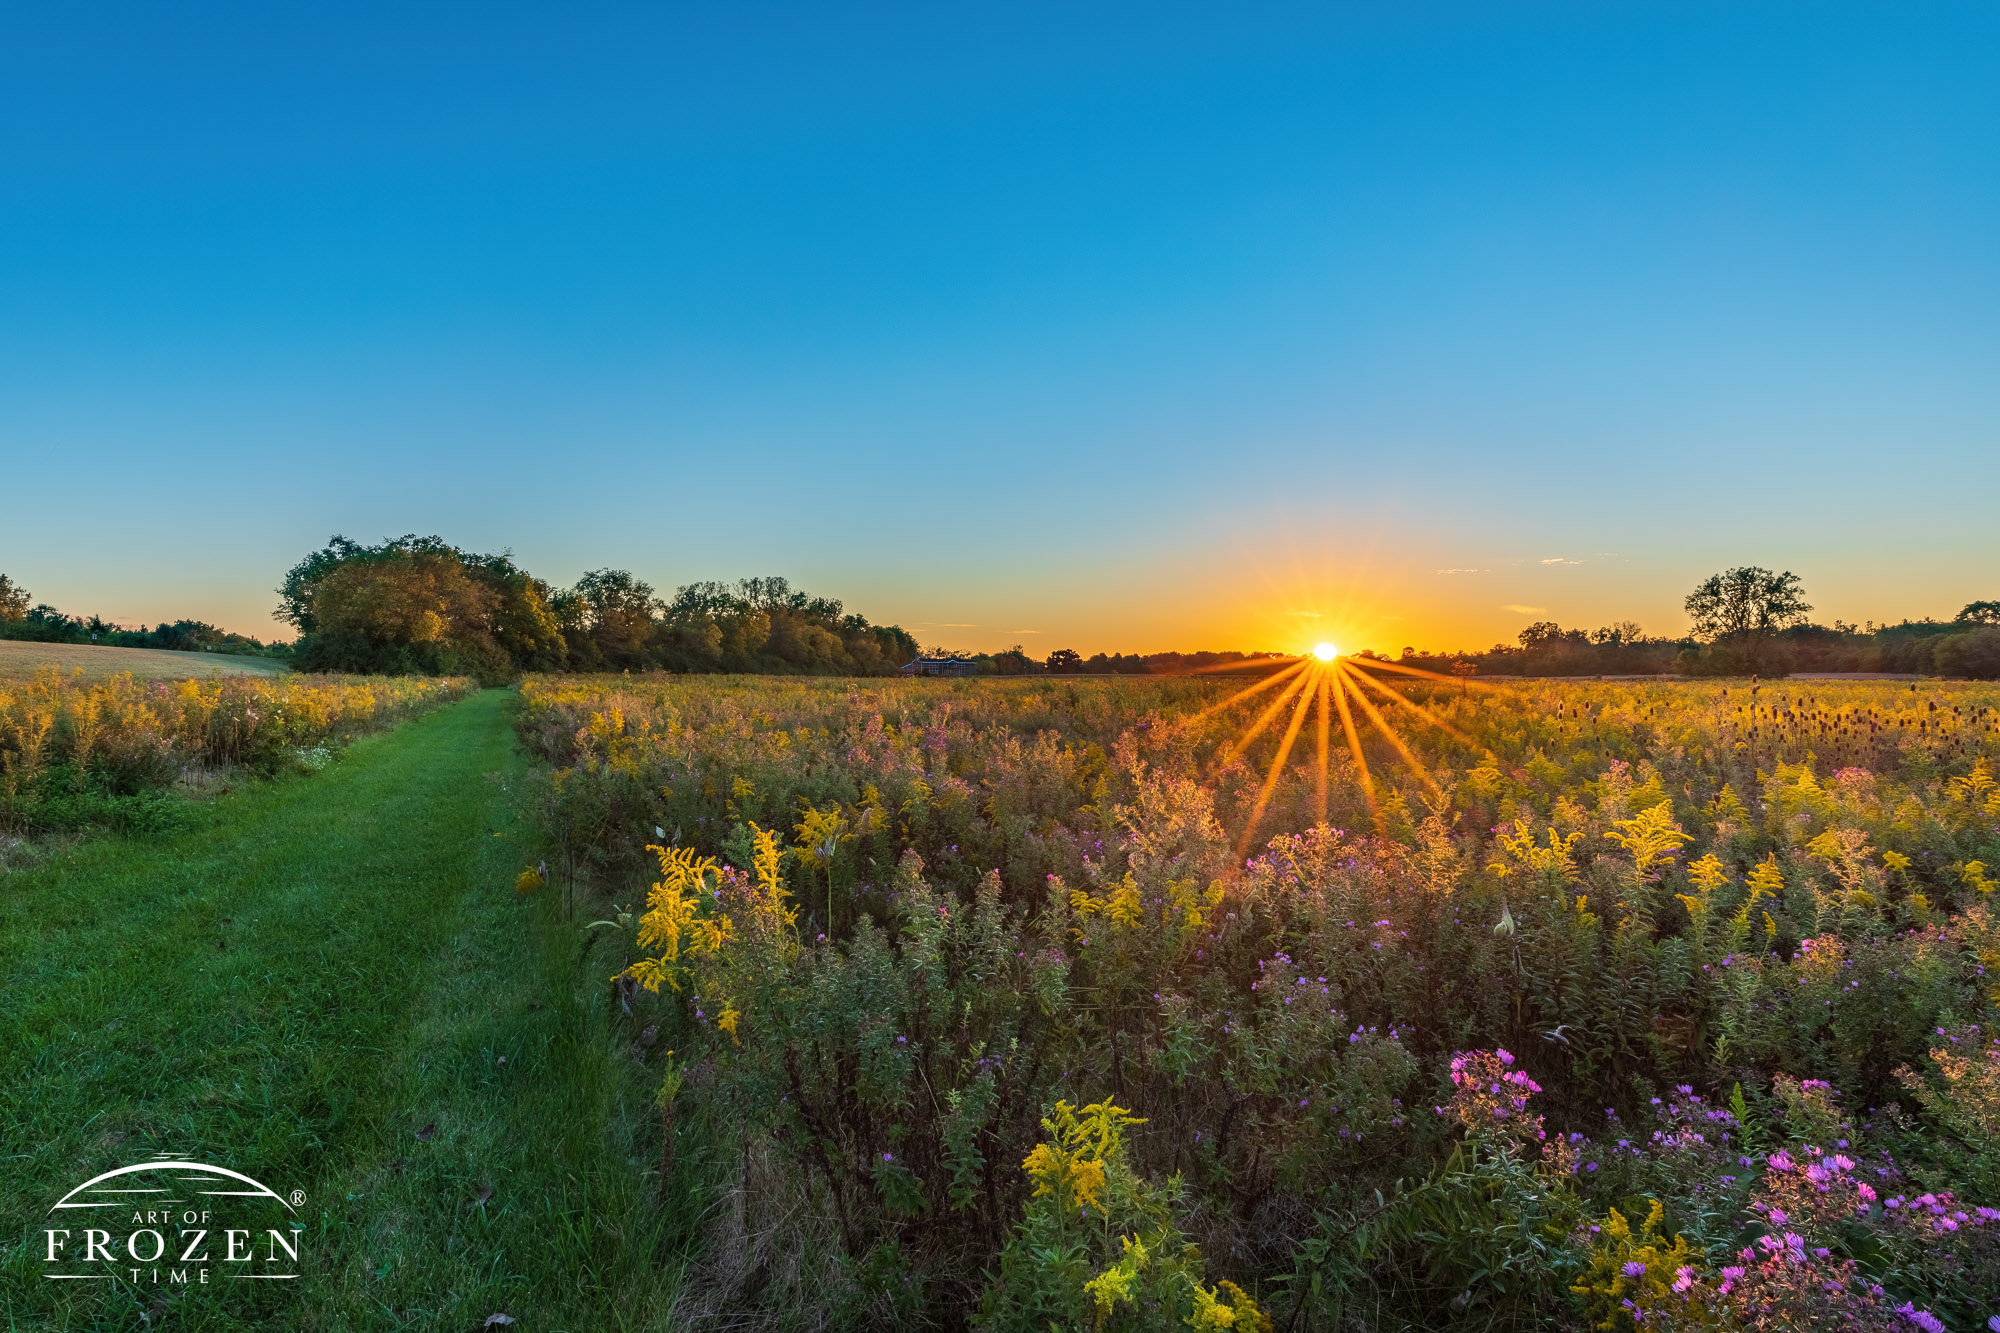 A former Revolutionary War battle site now serves as a tall-grass prairie where Ohio Goldenrods catch the last rays from the setting sun